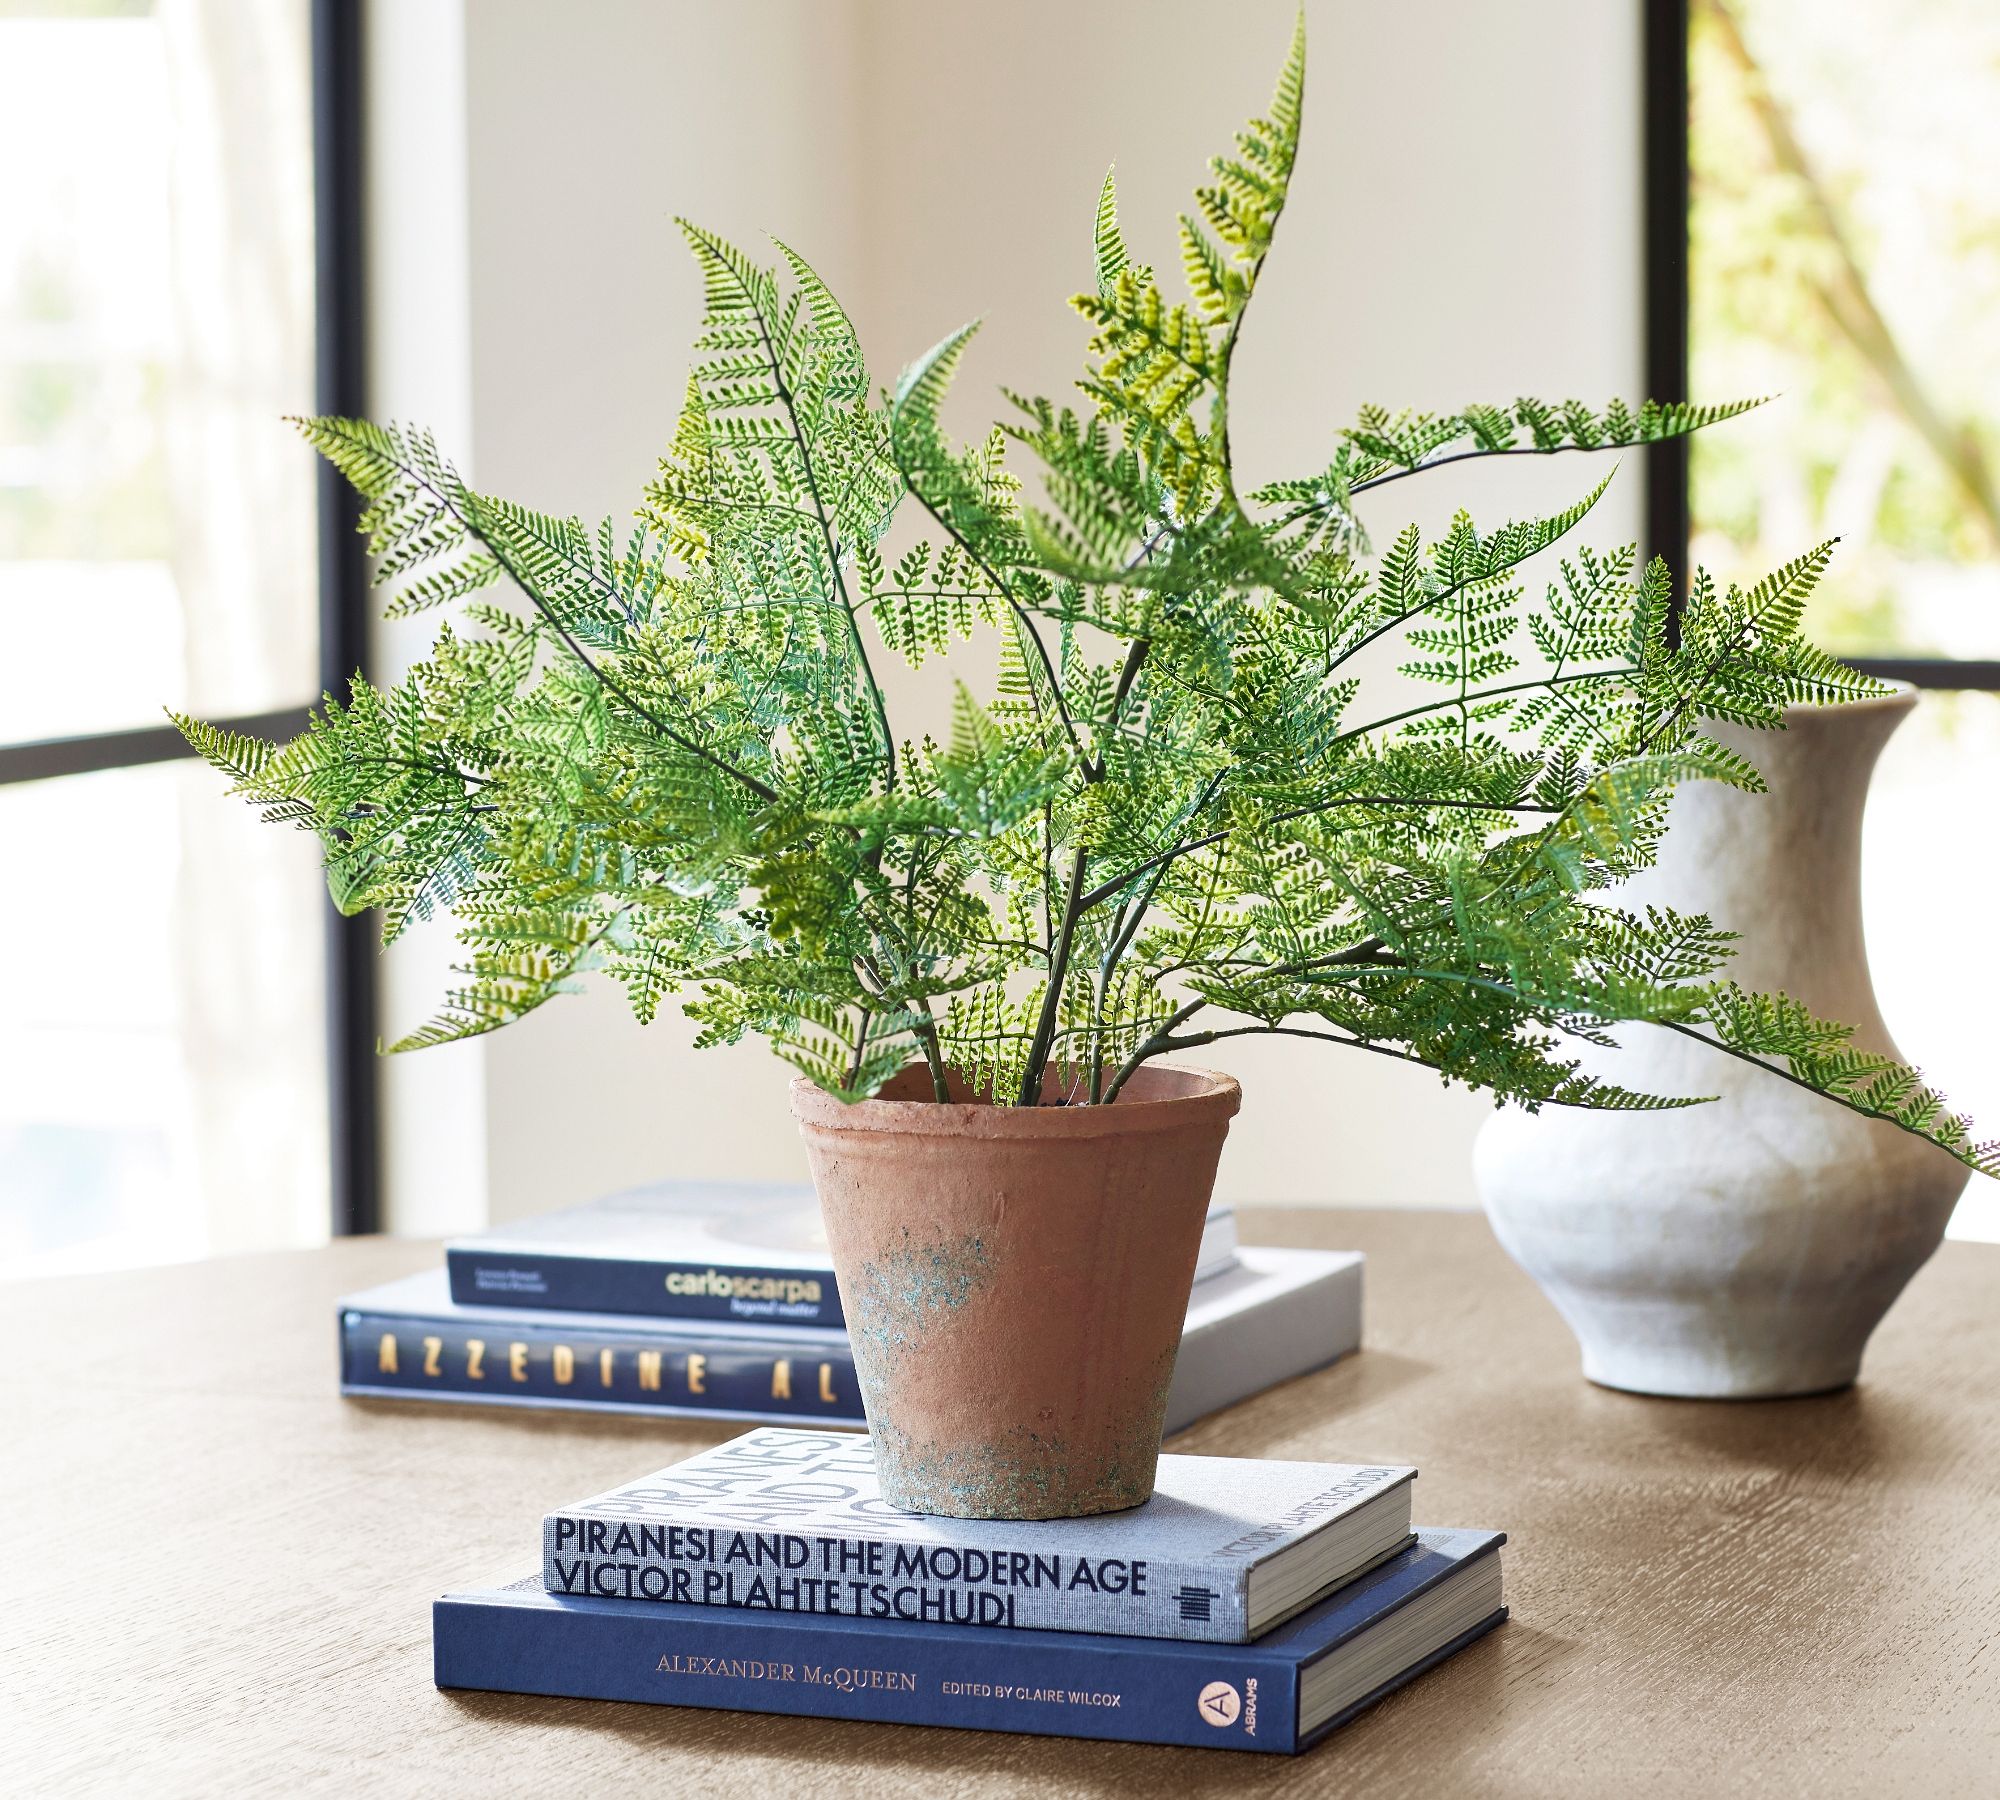 Faux Potted Japanese Climbing Fern